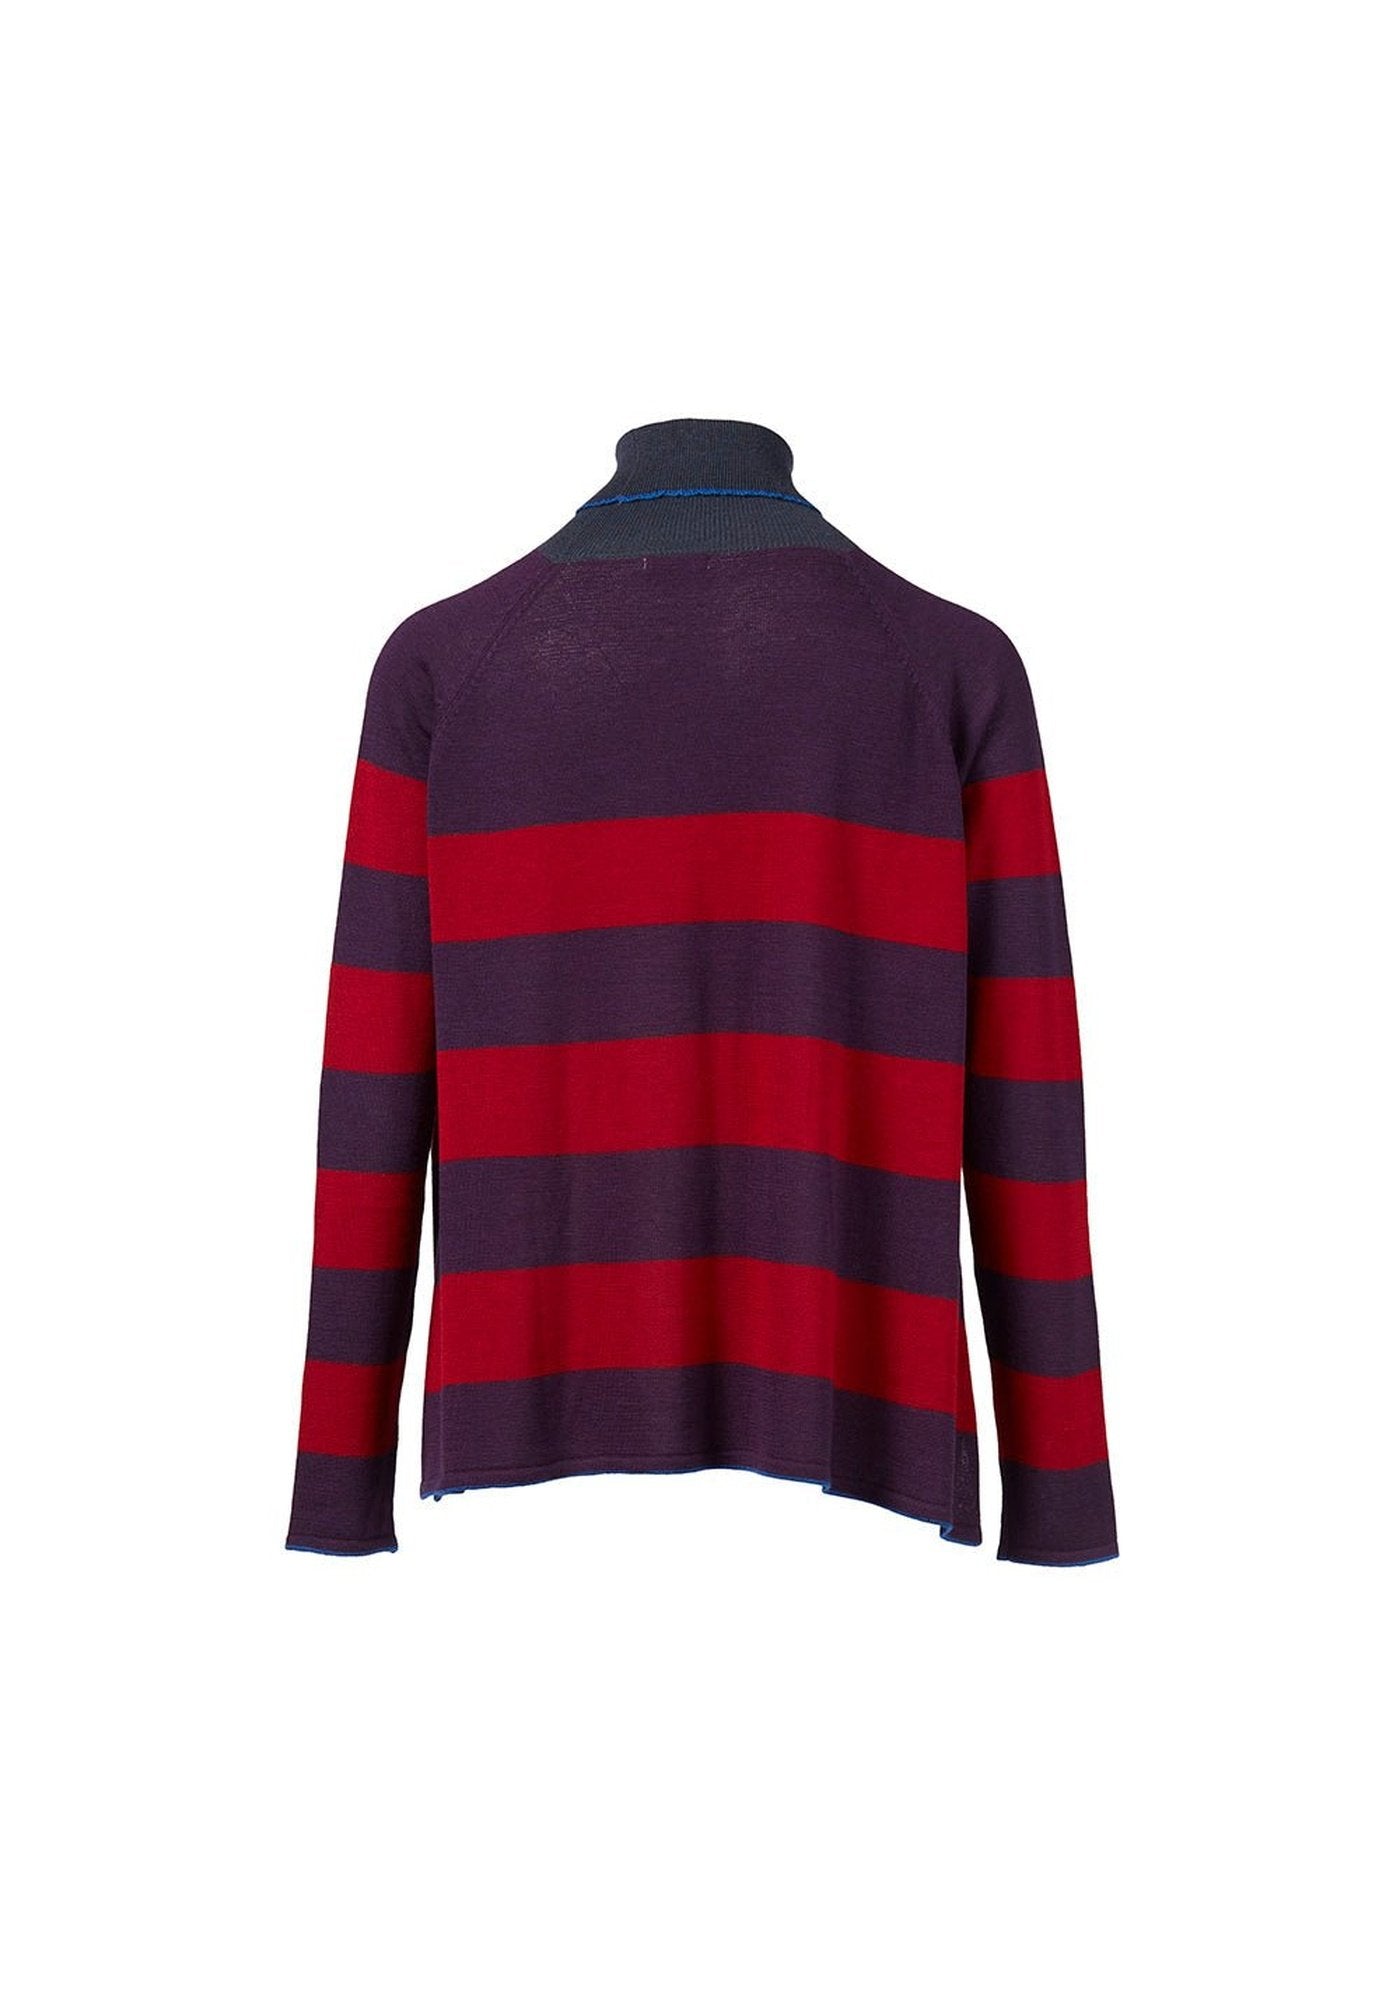 Top Key Turtle Neck Wide Stripes - Traces of Me